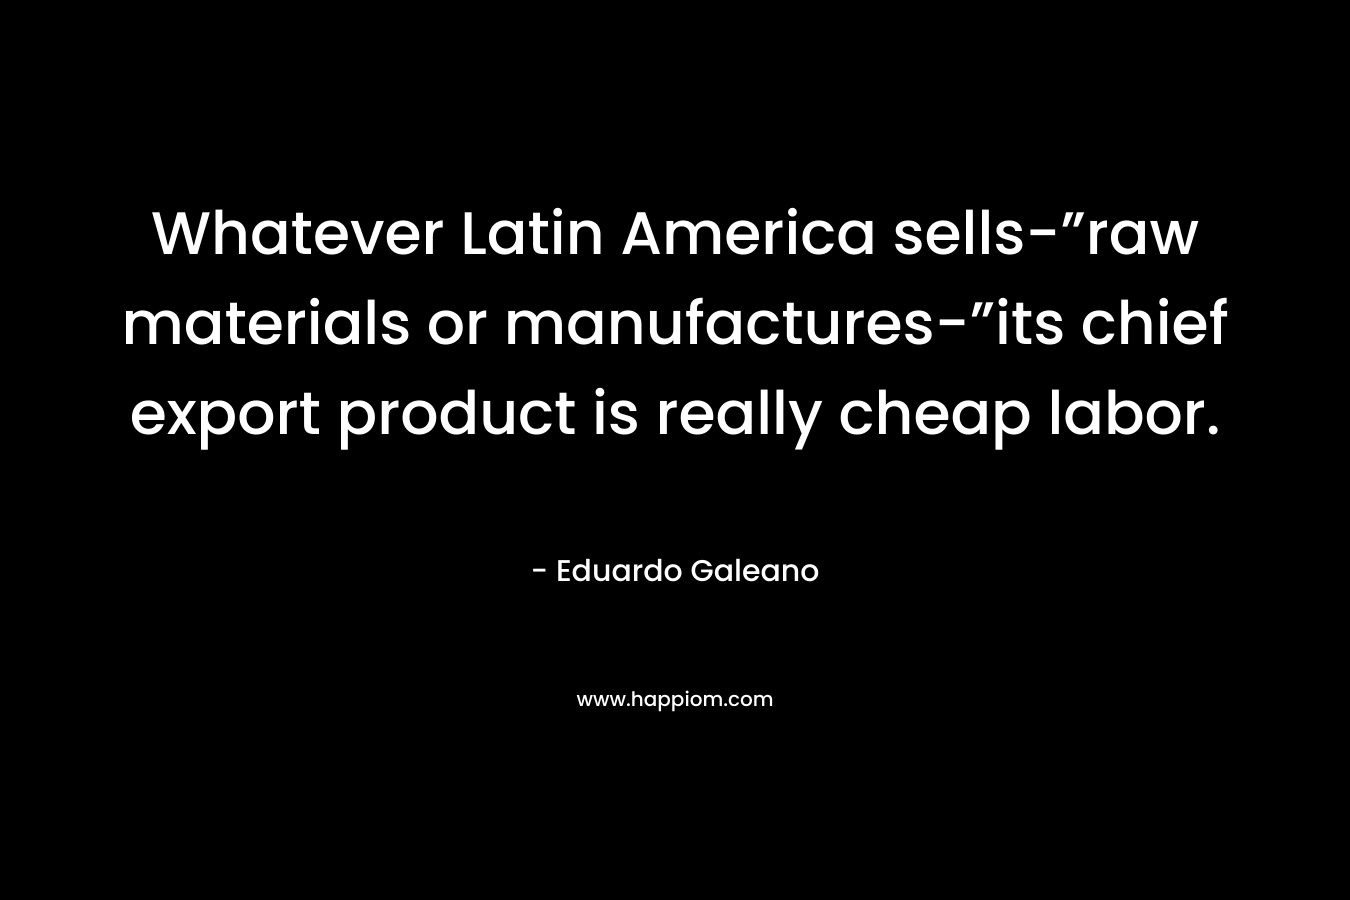 Whatever Latin America sells-”raw materials or manufactures-”its chief export product is really cheap labor.